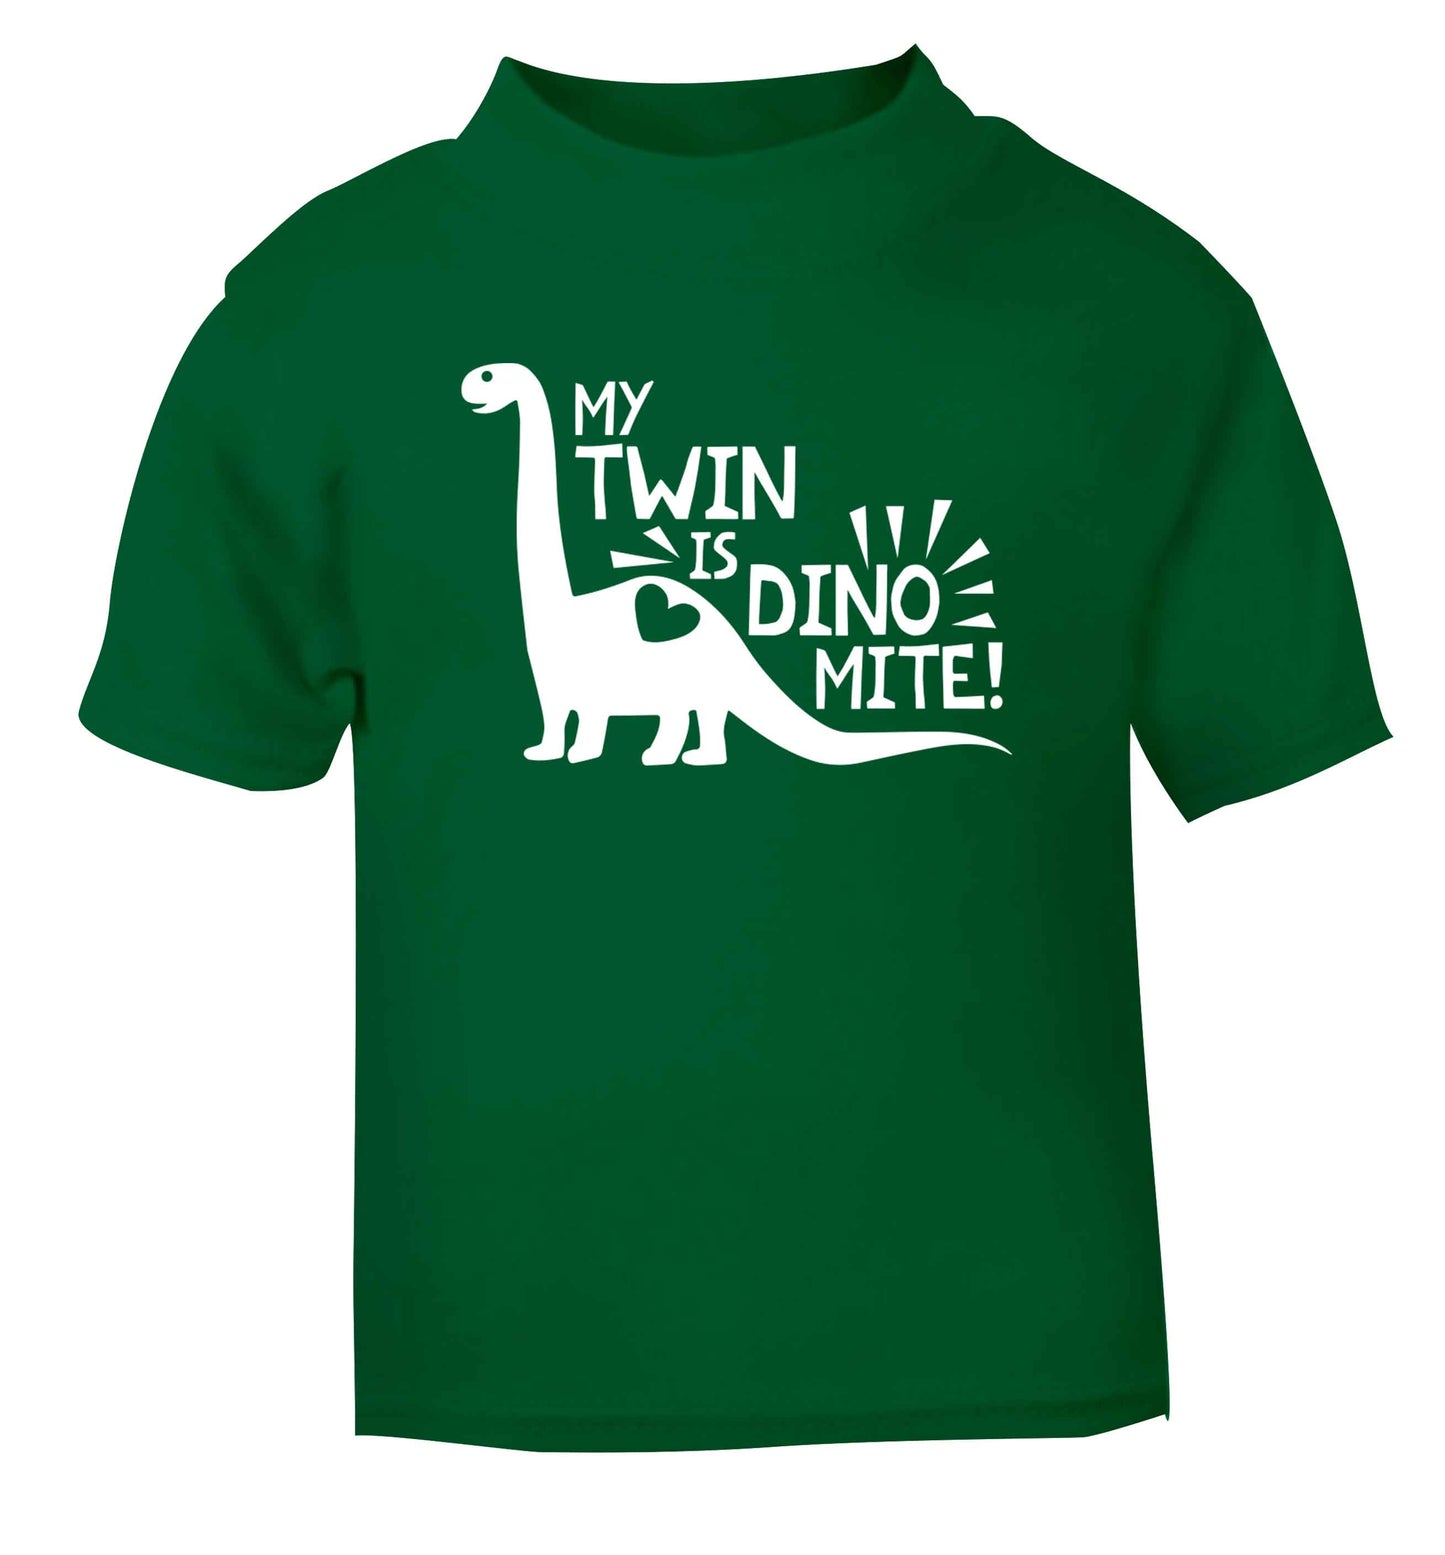 My twin is dinomite! green Baby Toddler Tshirt 2 Years